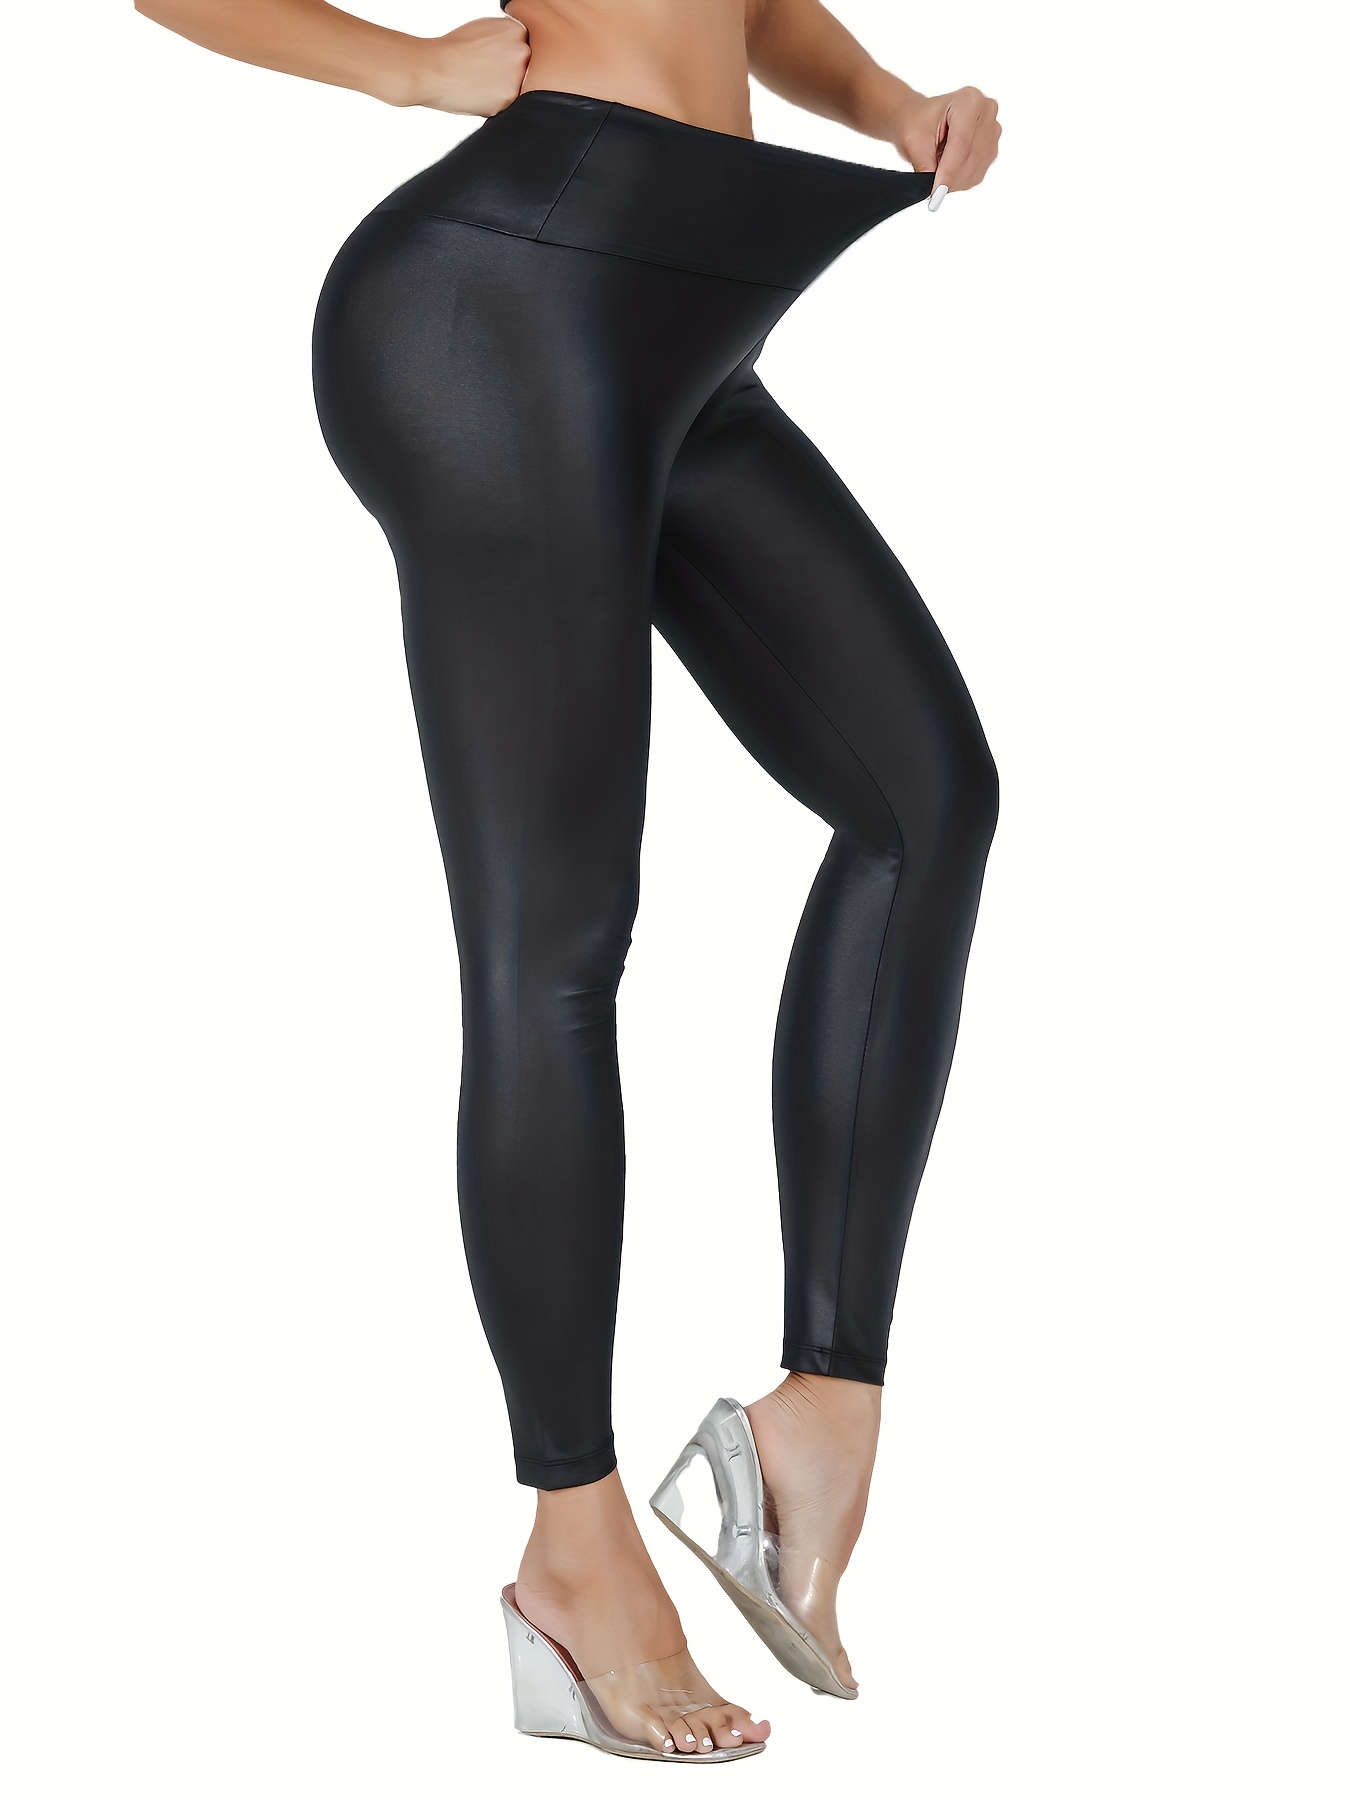 Womens Glossy See-Through Leggings Stretchy Yoga Workout Skinny